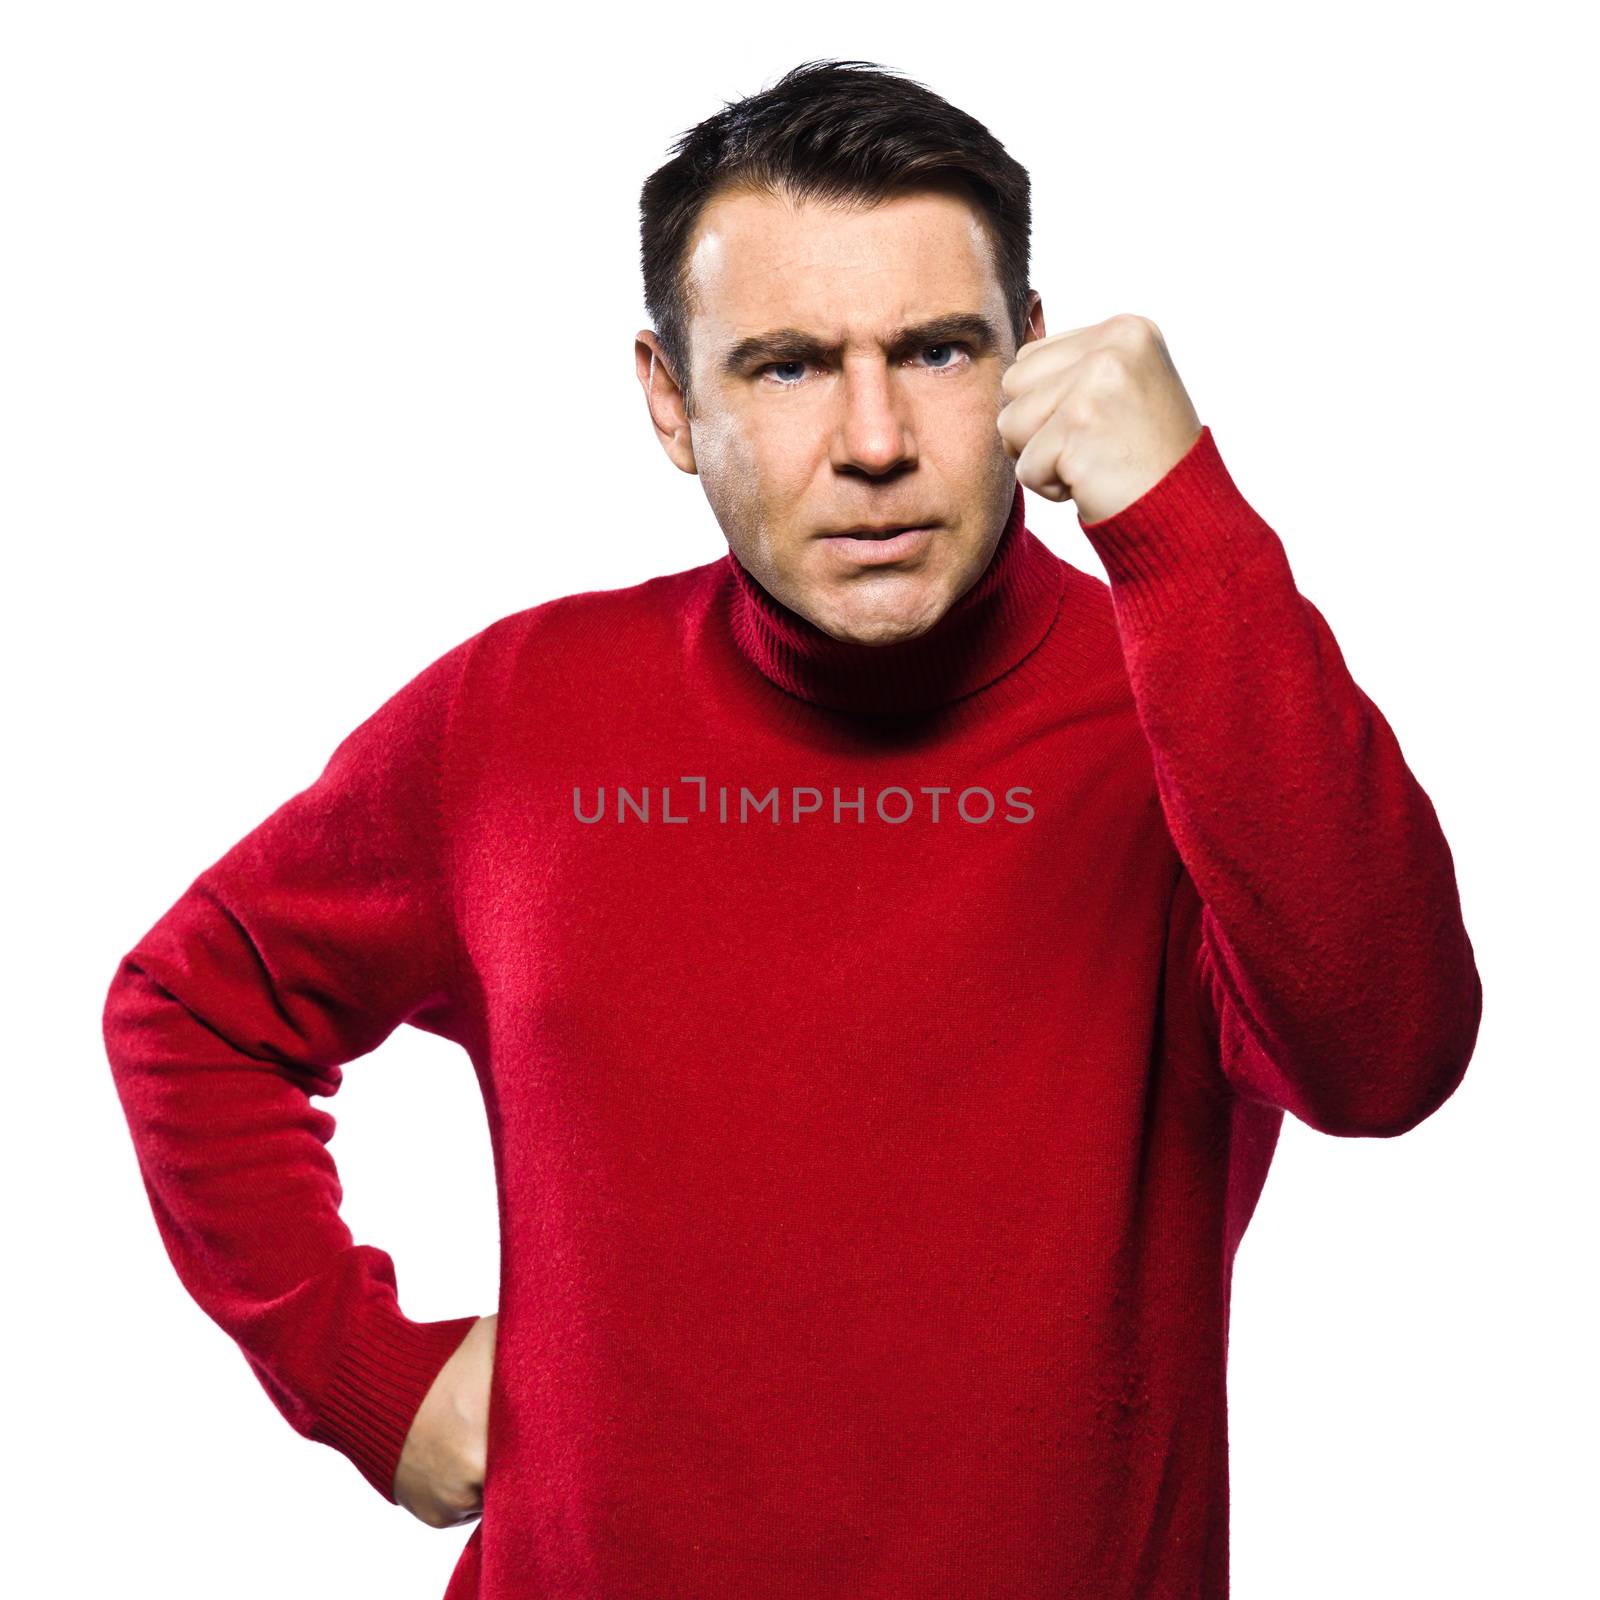 caucasian man angry gesturing fist raised menacing threat studio portrait on isolated white backgound